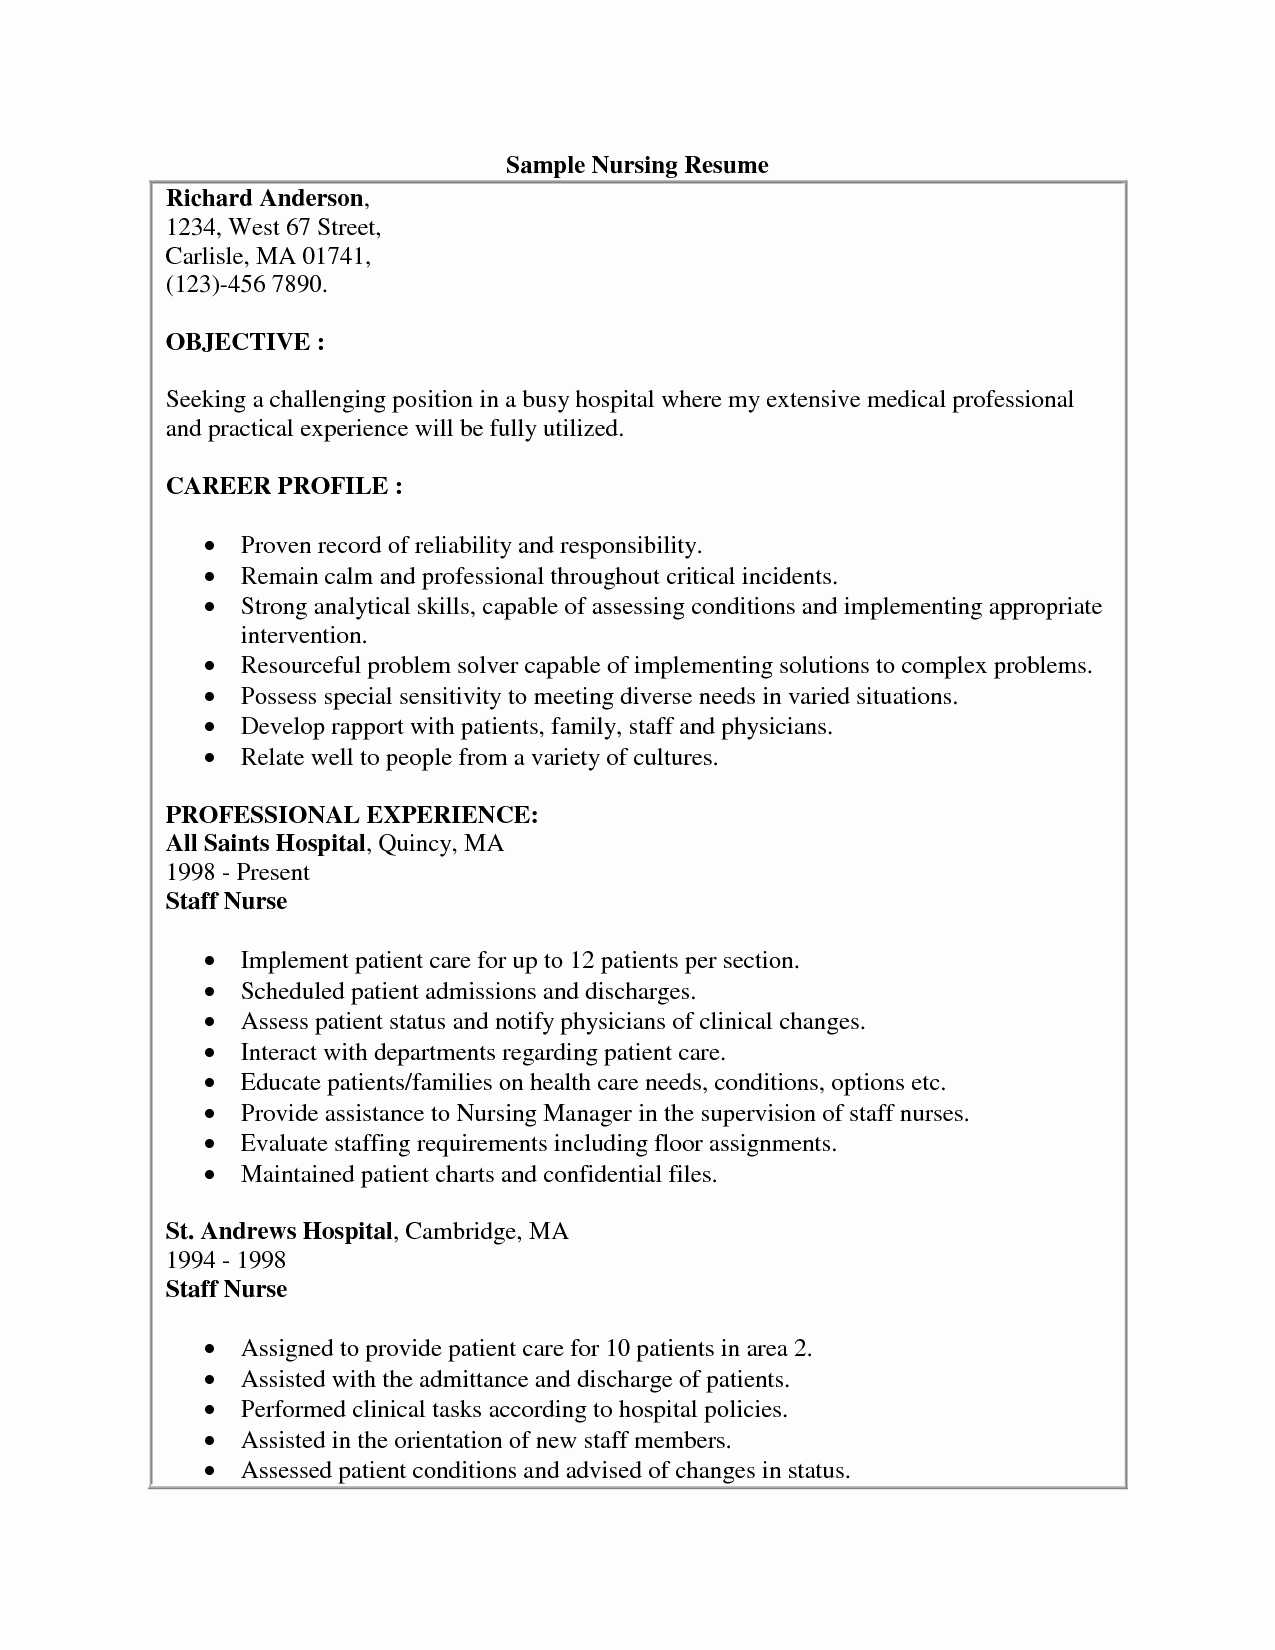 Skills Worksheet Concept Review Answers Along with Skills Section Resume Examples Beautiful Resume Nursing Graduate